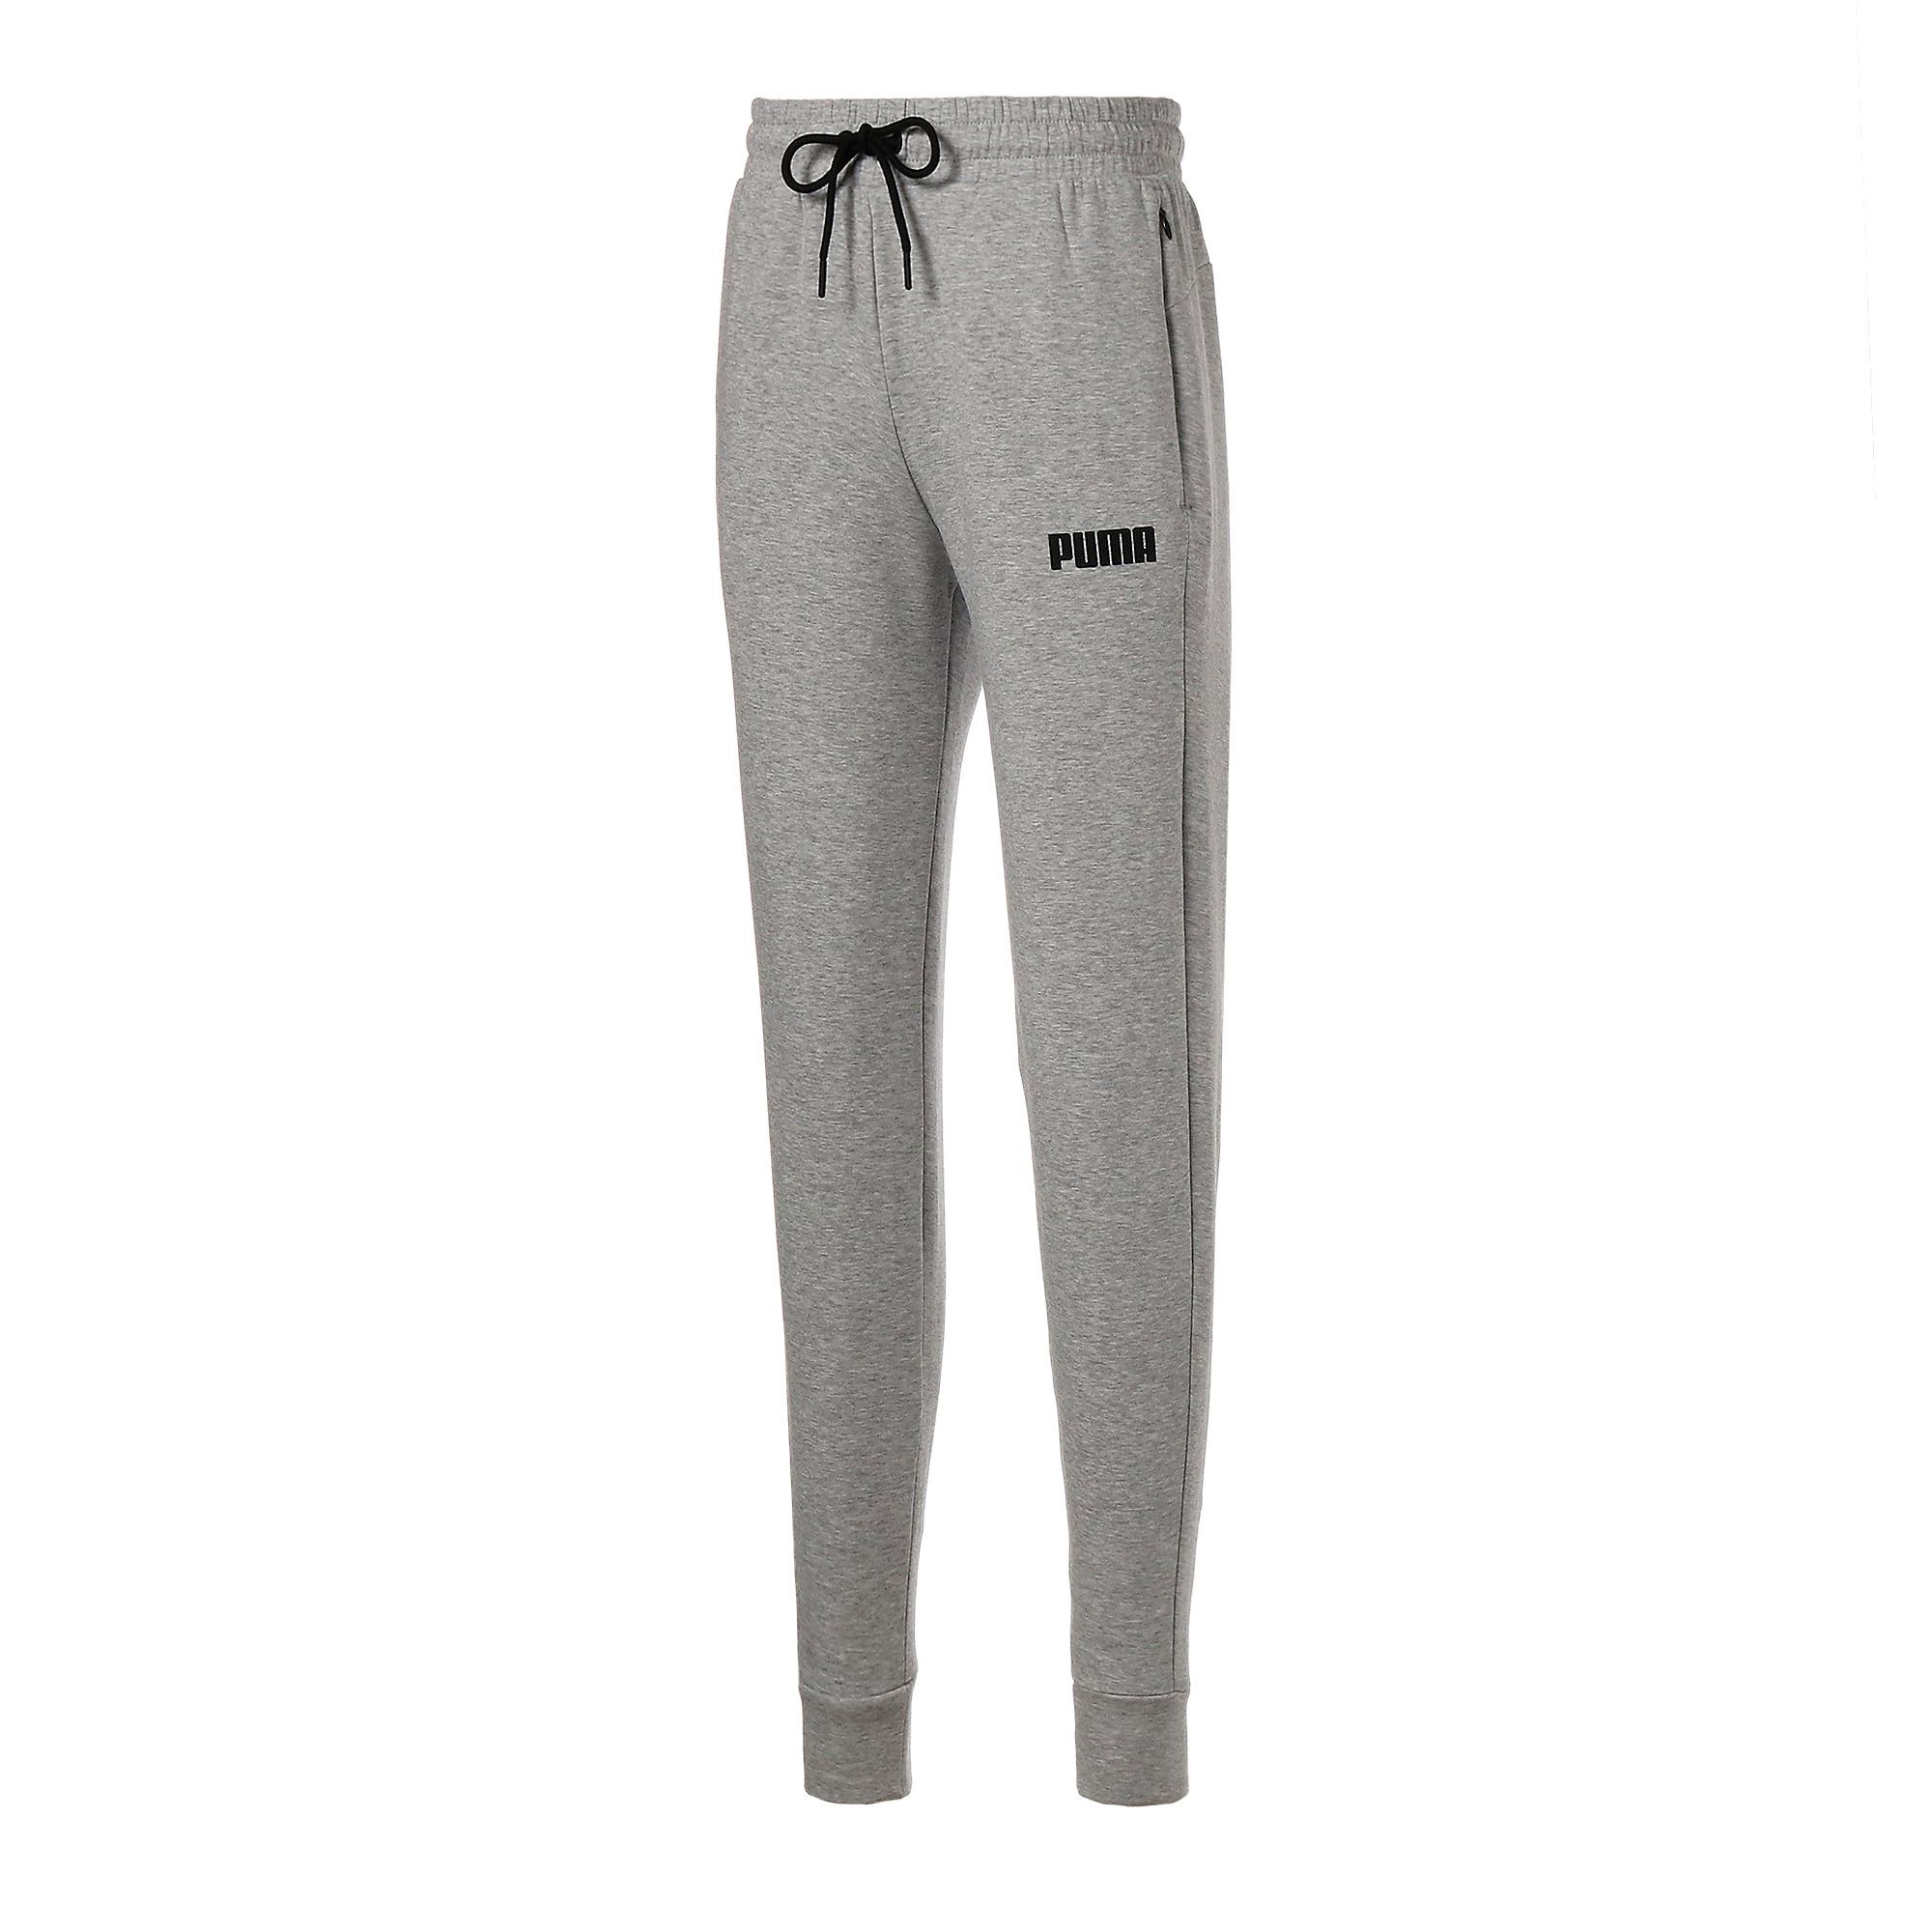  Perfect for relaxing at home or heading out, the SPACER Pants will keep you dry and fresh, thanks to their moisture-wicking material. DETAILS Regular fitComfortable style by PUMAPUMA branding detailsSignature PUMA design elements